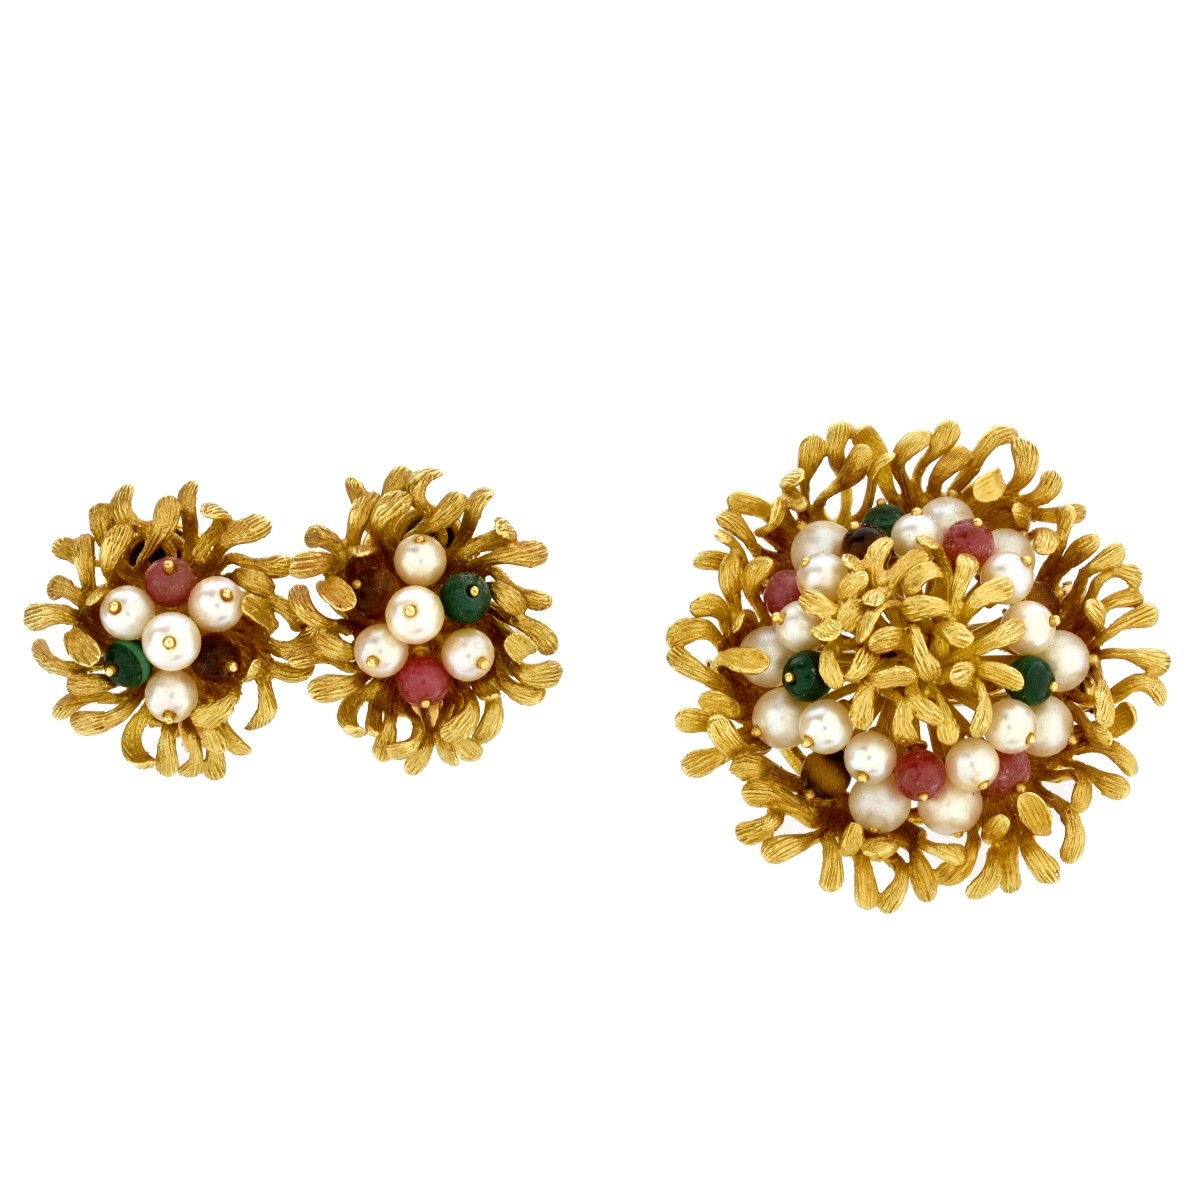 Spitzer and Furman 18K Brooch and Earrings